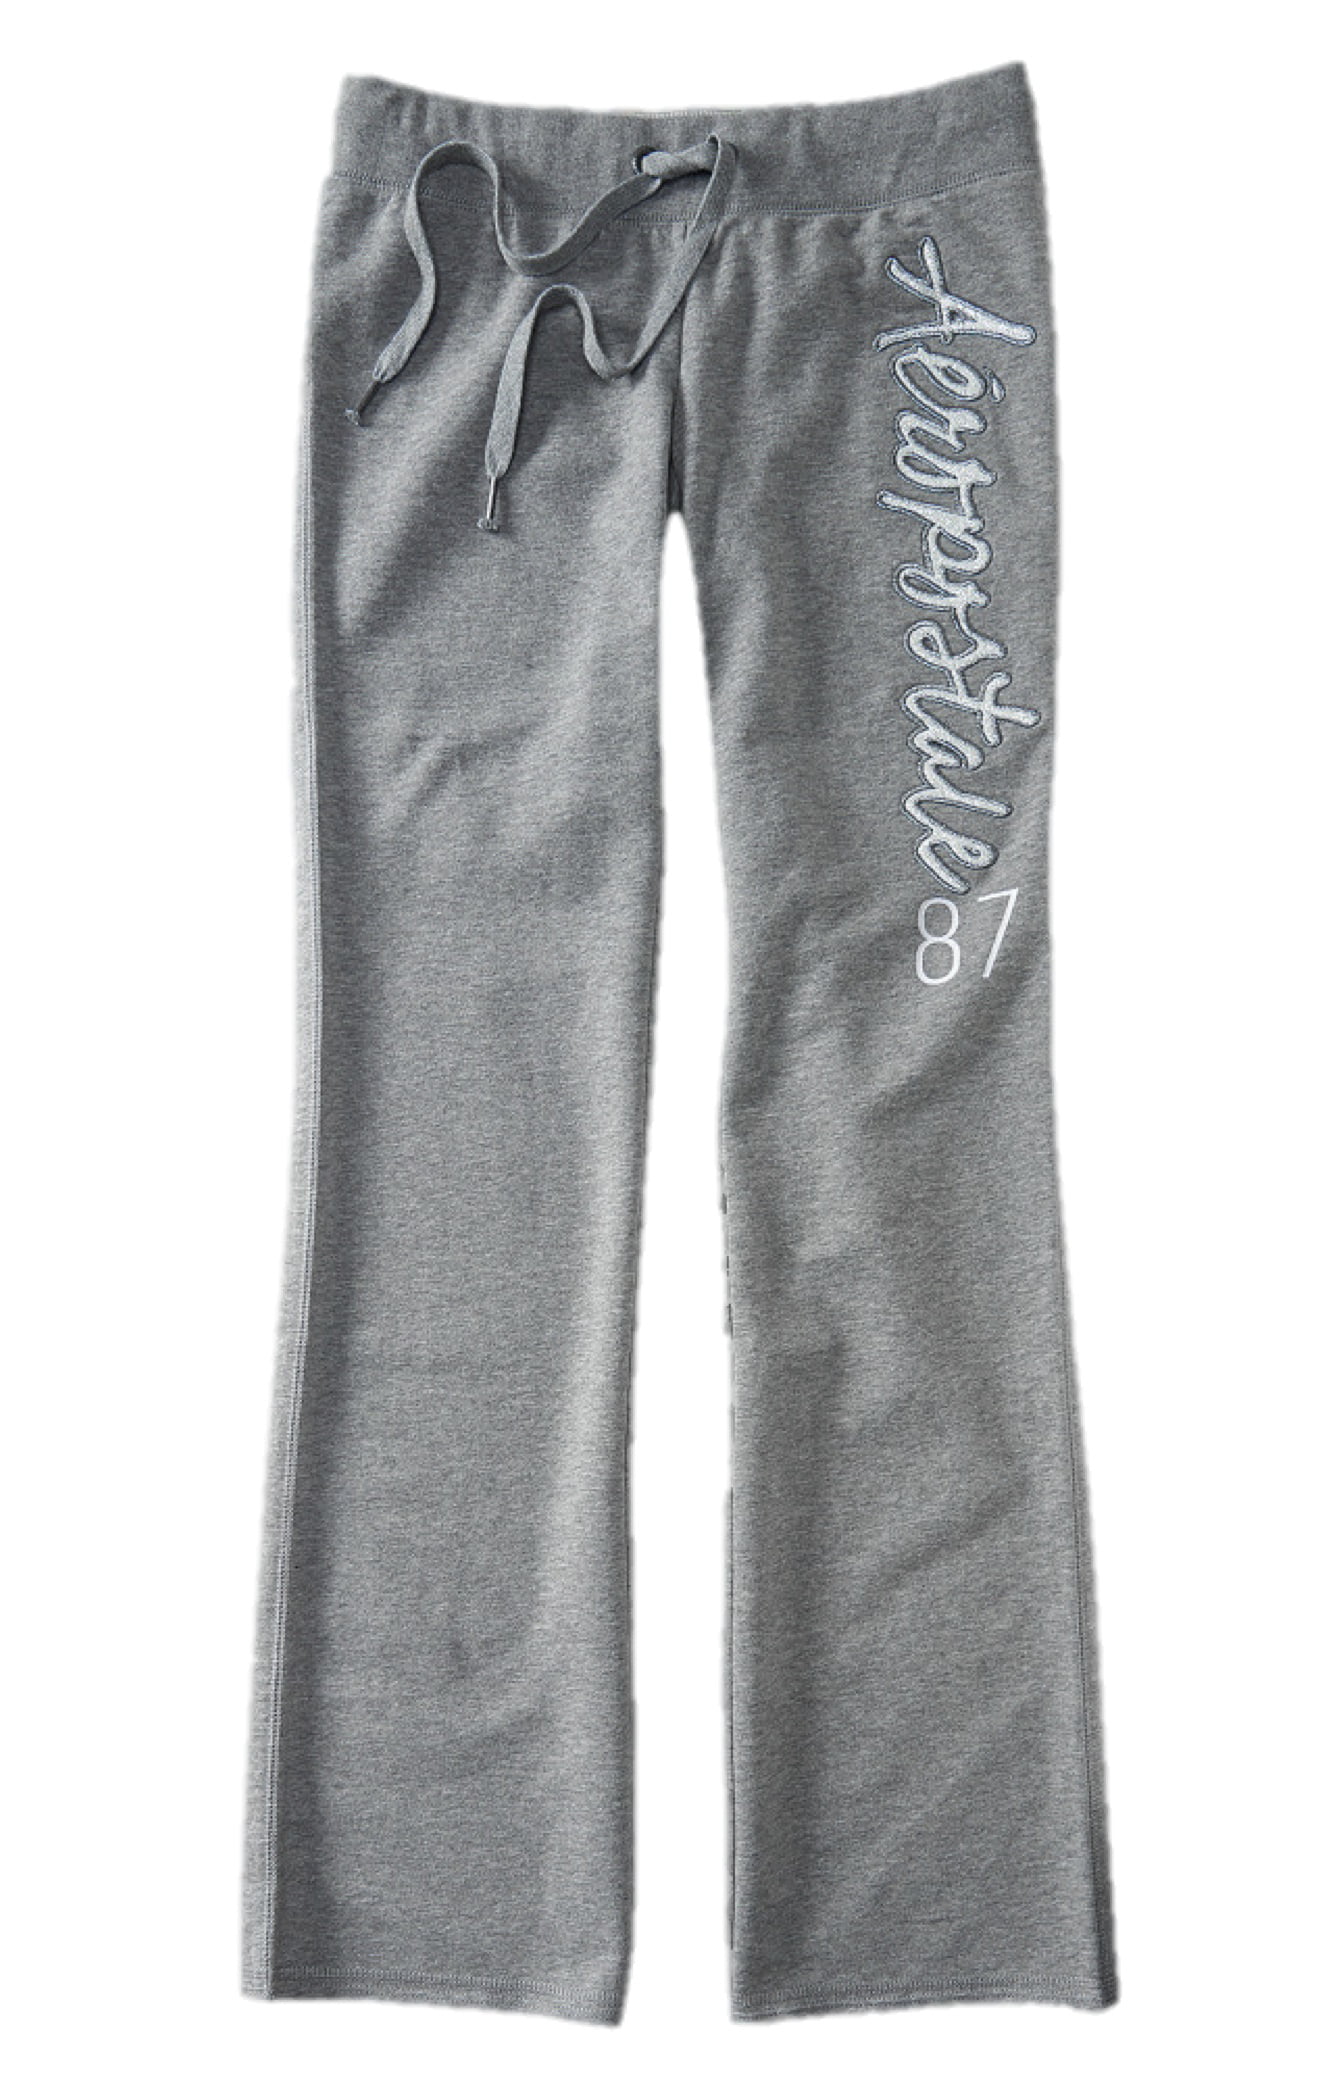 Aeropostale Womens Fit and Flare Sweatpants Glitter Bling